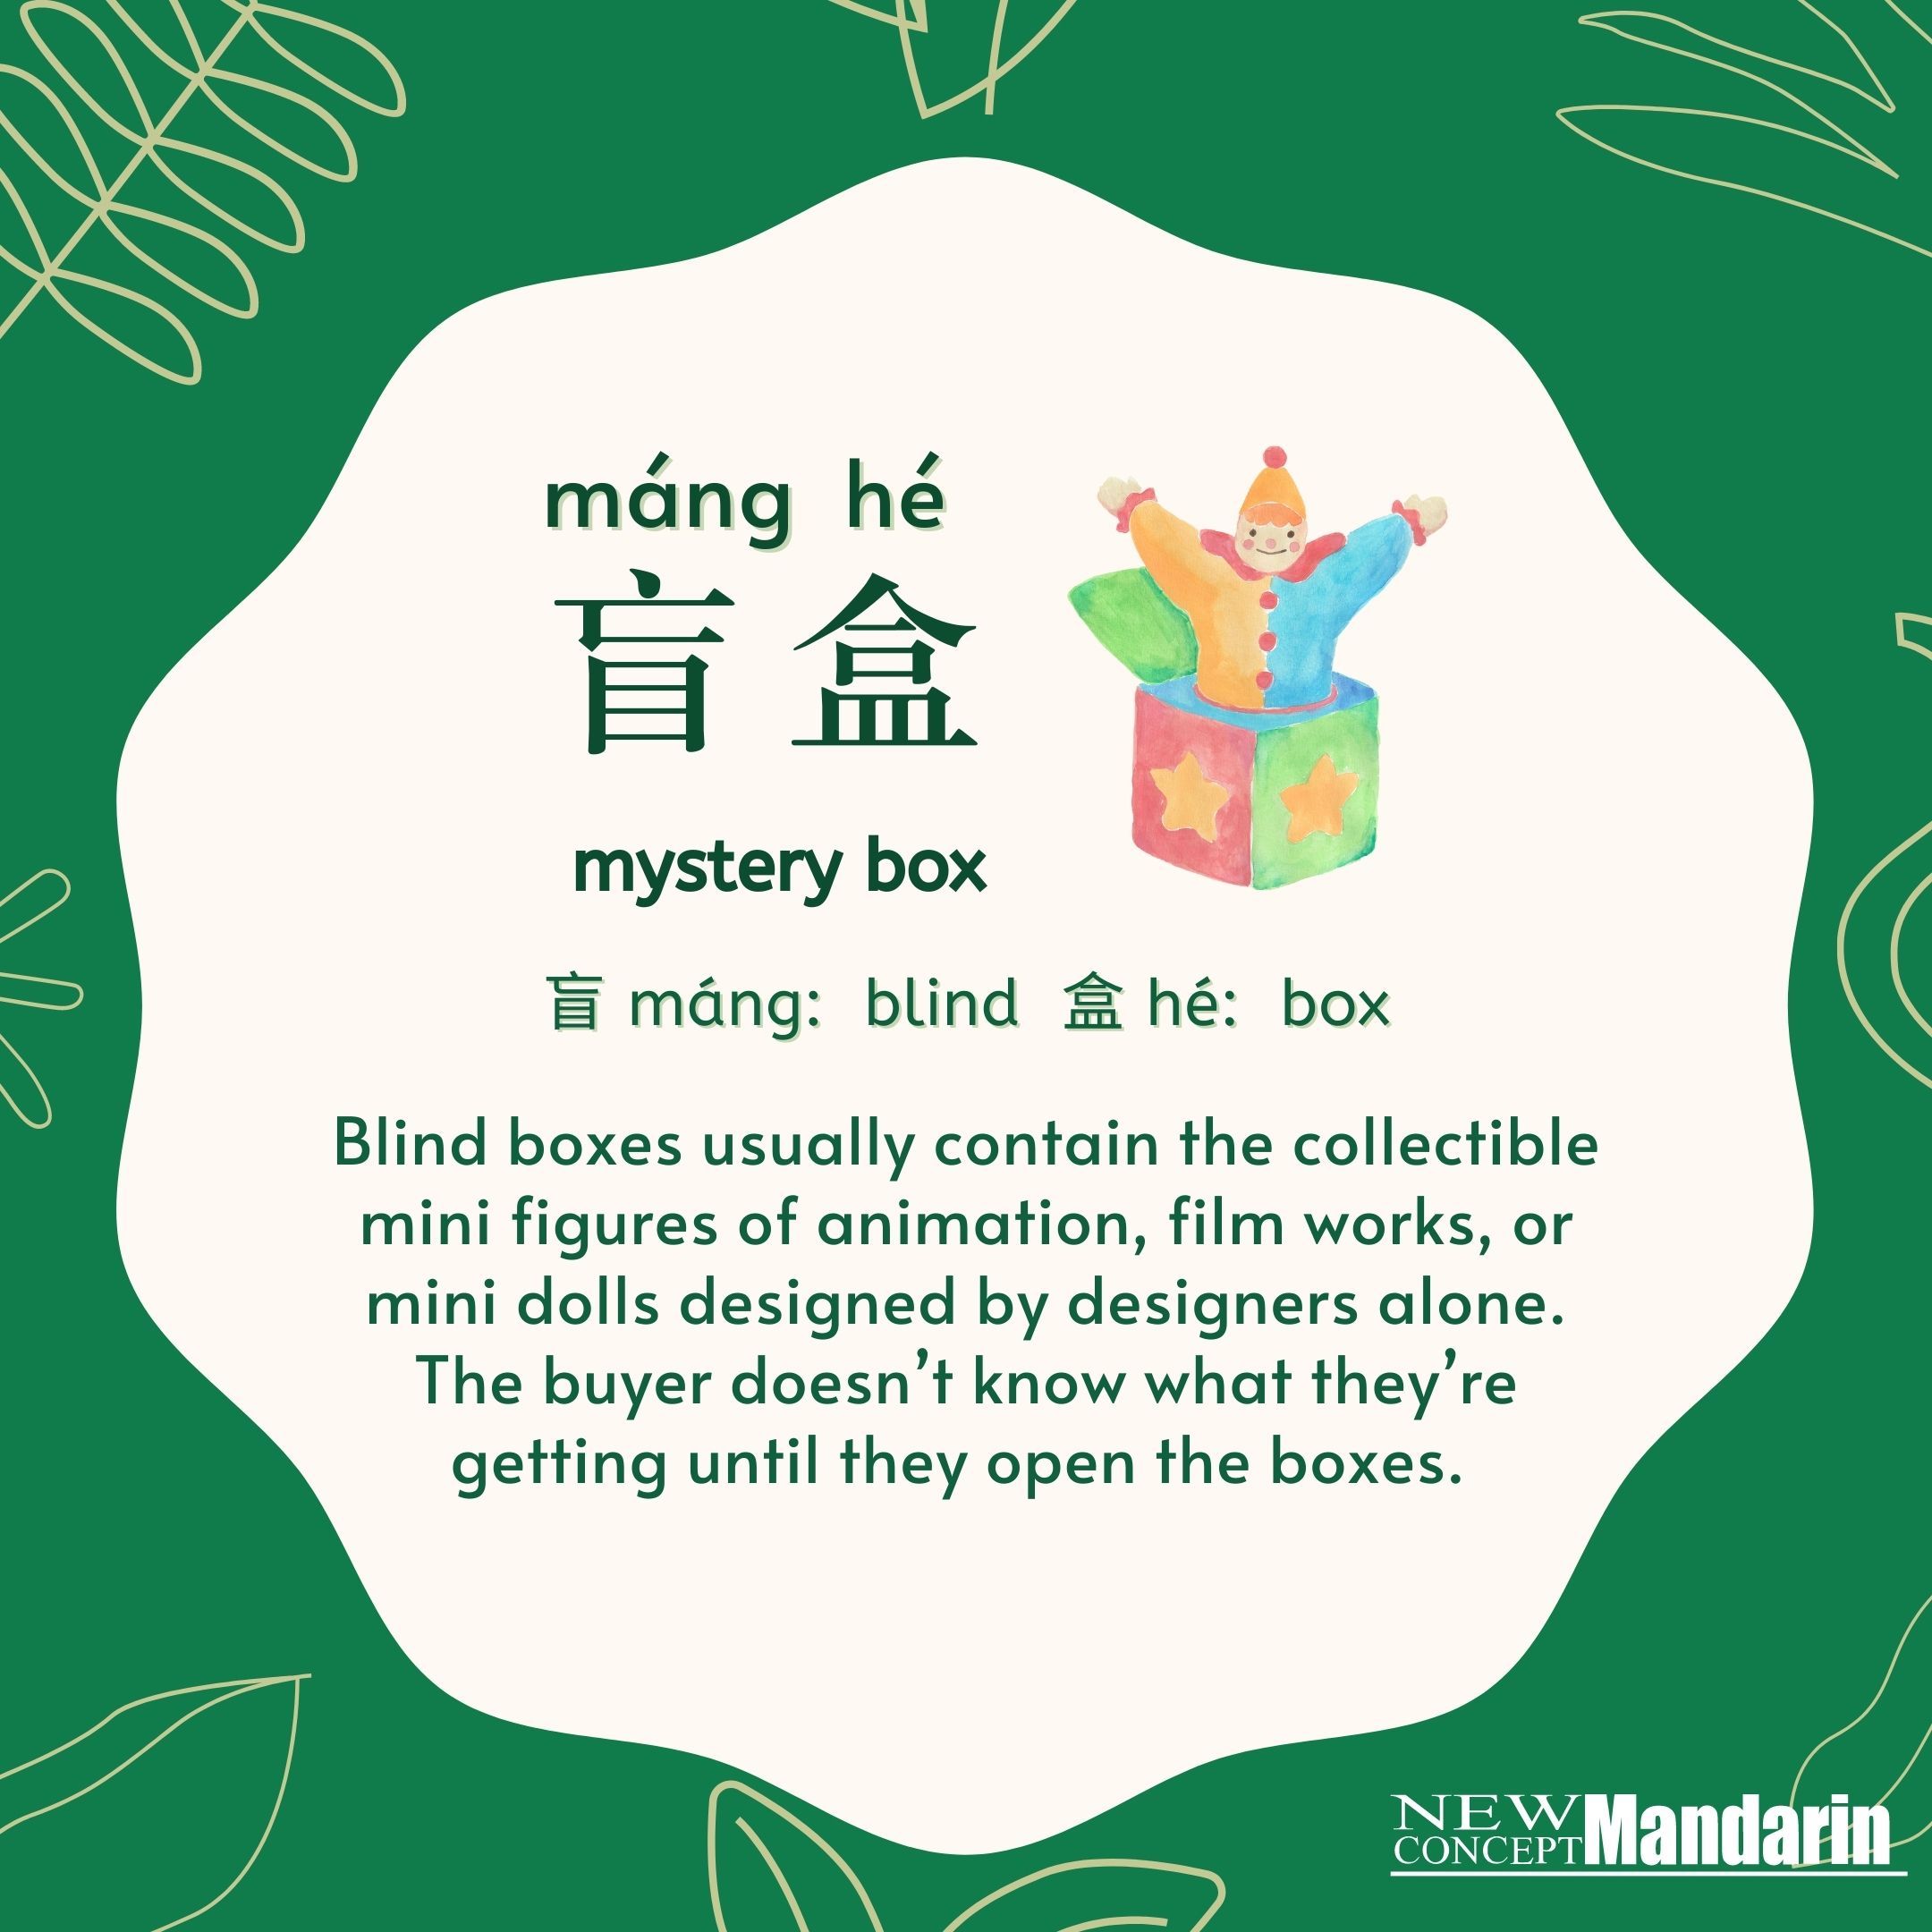 盲盒  máng hé. 盲máng: blind, 盒 hé: box. Blind boxes usually contain the collectible mini figures of animation, film works, or mini dolls designed by designers alone. The buyer doesn’t know what they're getting until they open the boxes. 